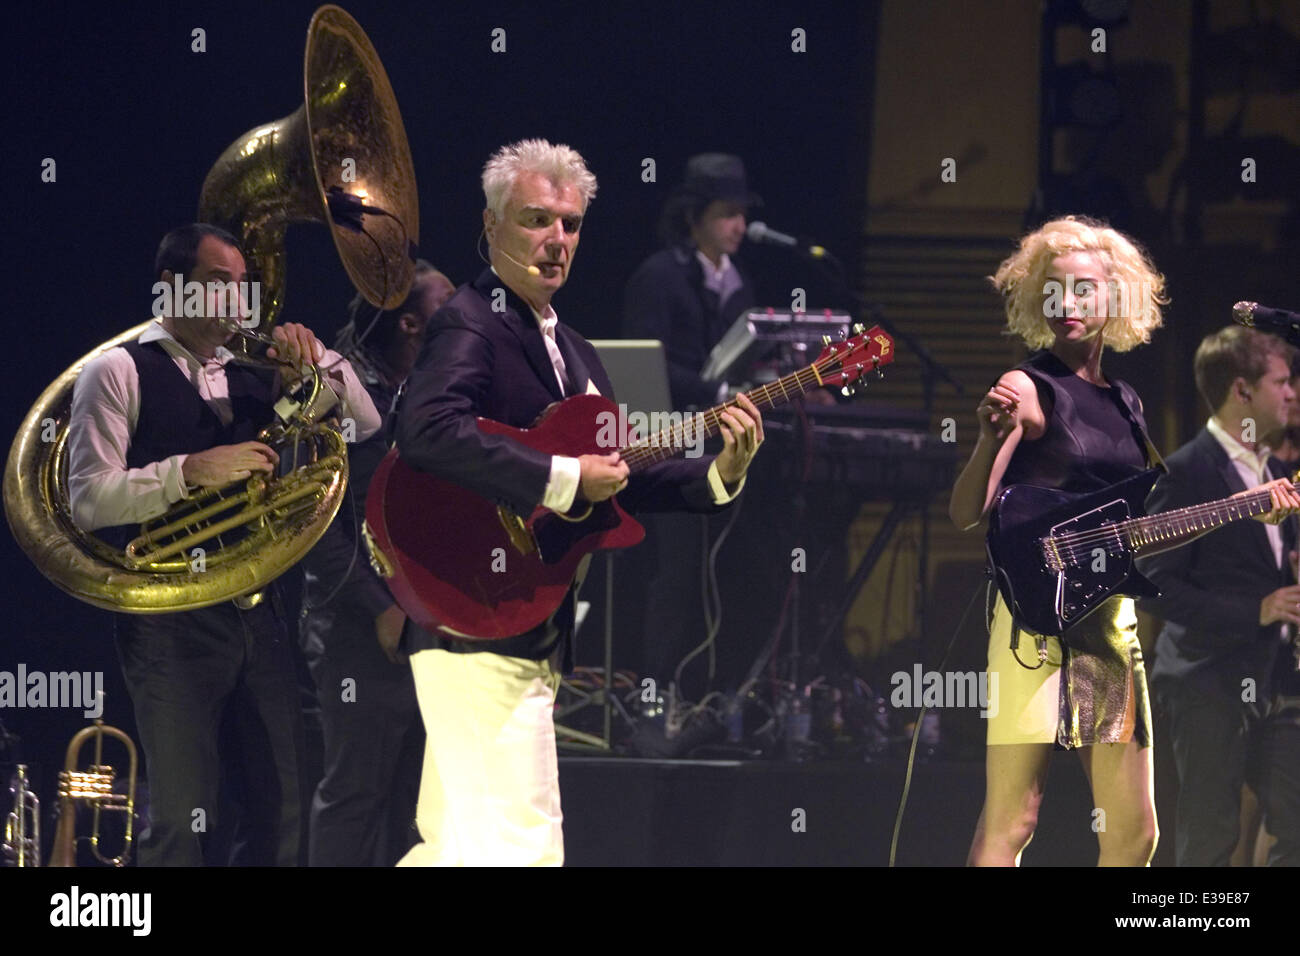 David Byrne and St Vincent perform during a headlining gig at Glasgow Royal Concert Hall  Featuring: David Byrne,St Vincent,Annie Clark Where: Glasgow, United Kingdom When: 29 Aug 2013 Stock Photo